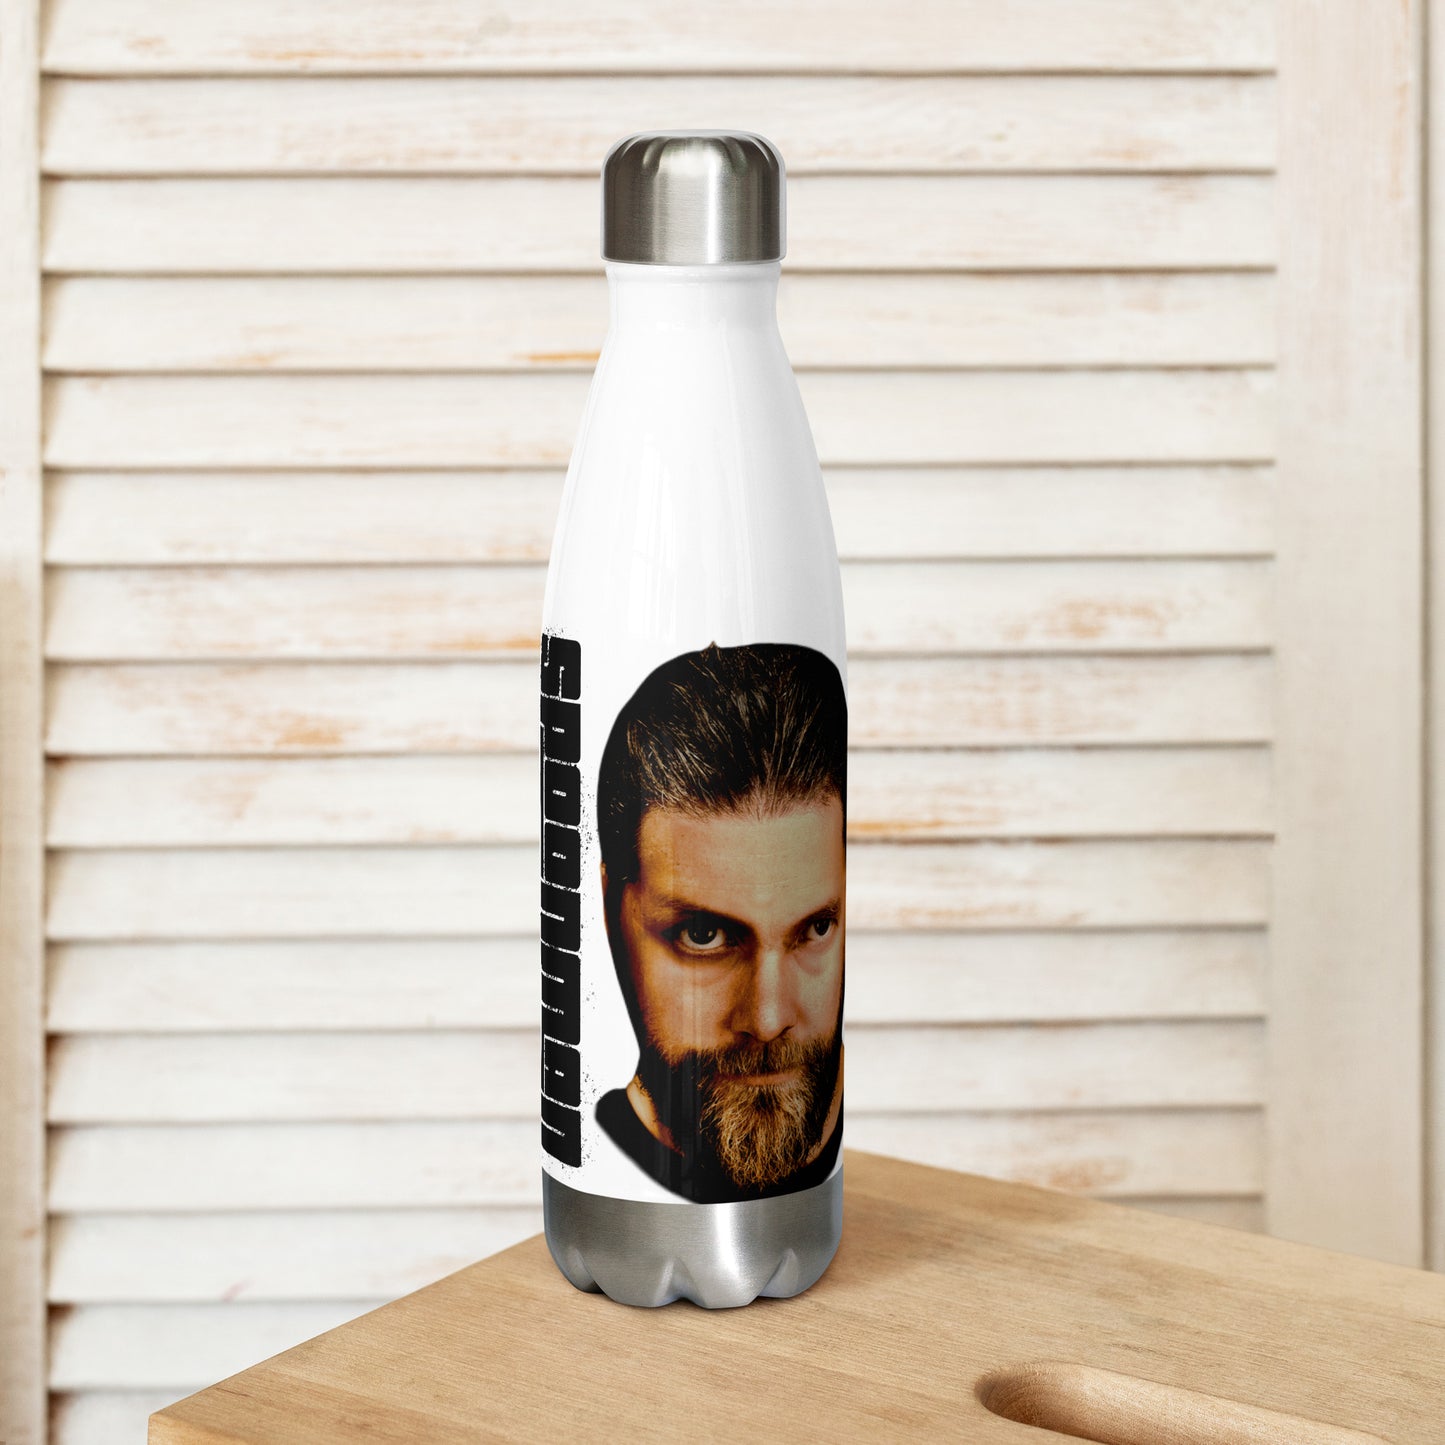 The Adamant White water bottle